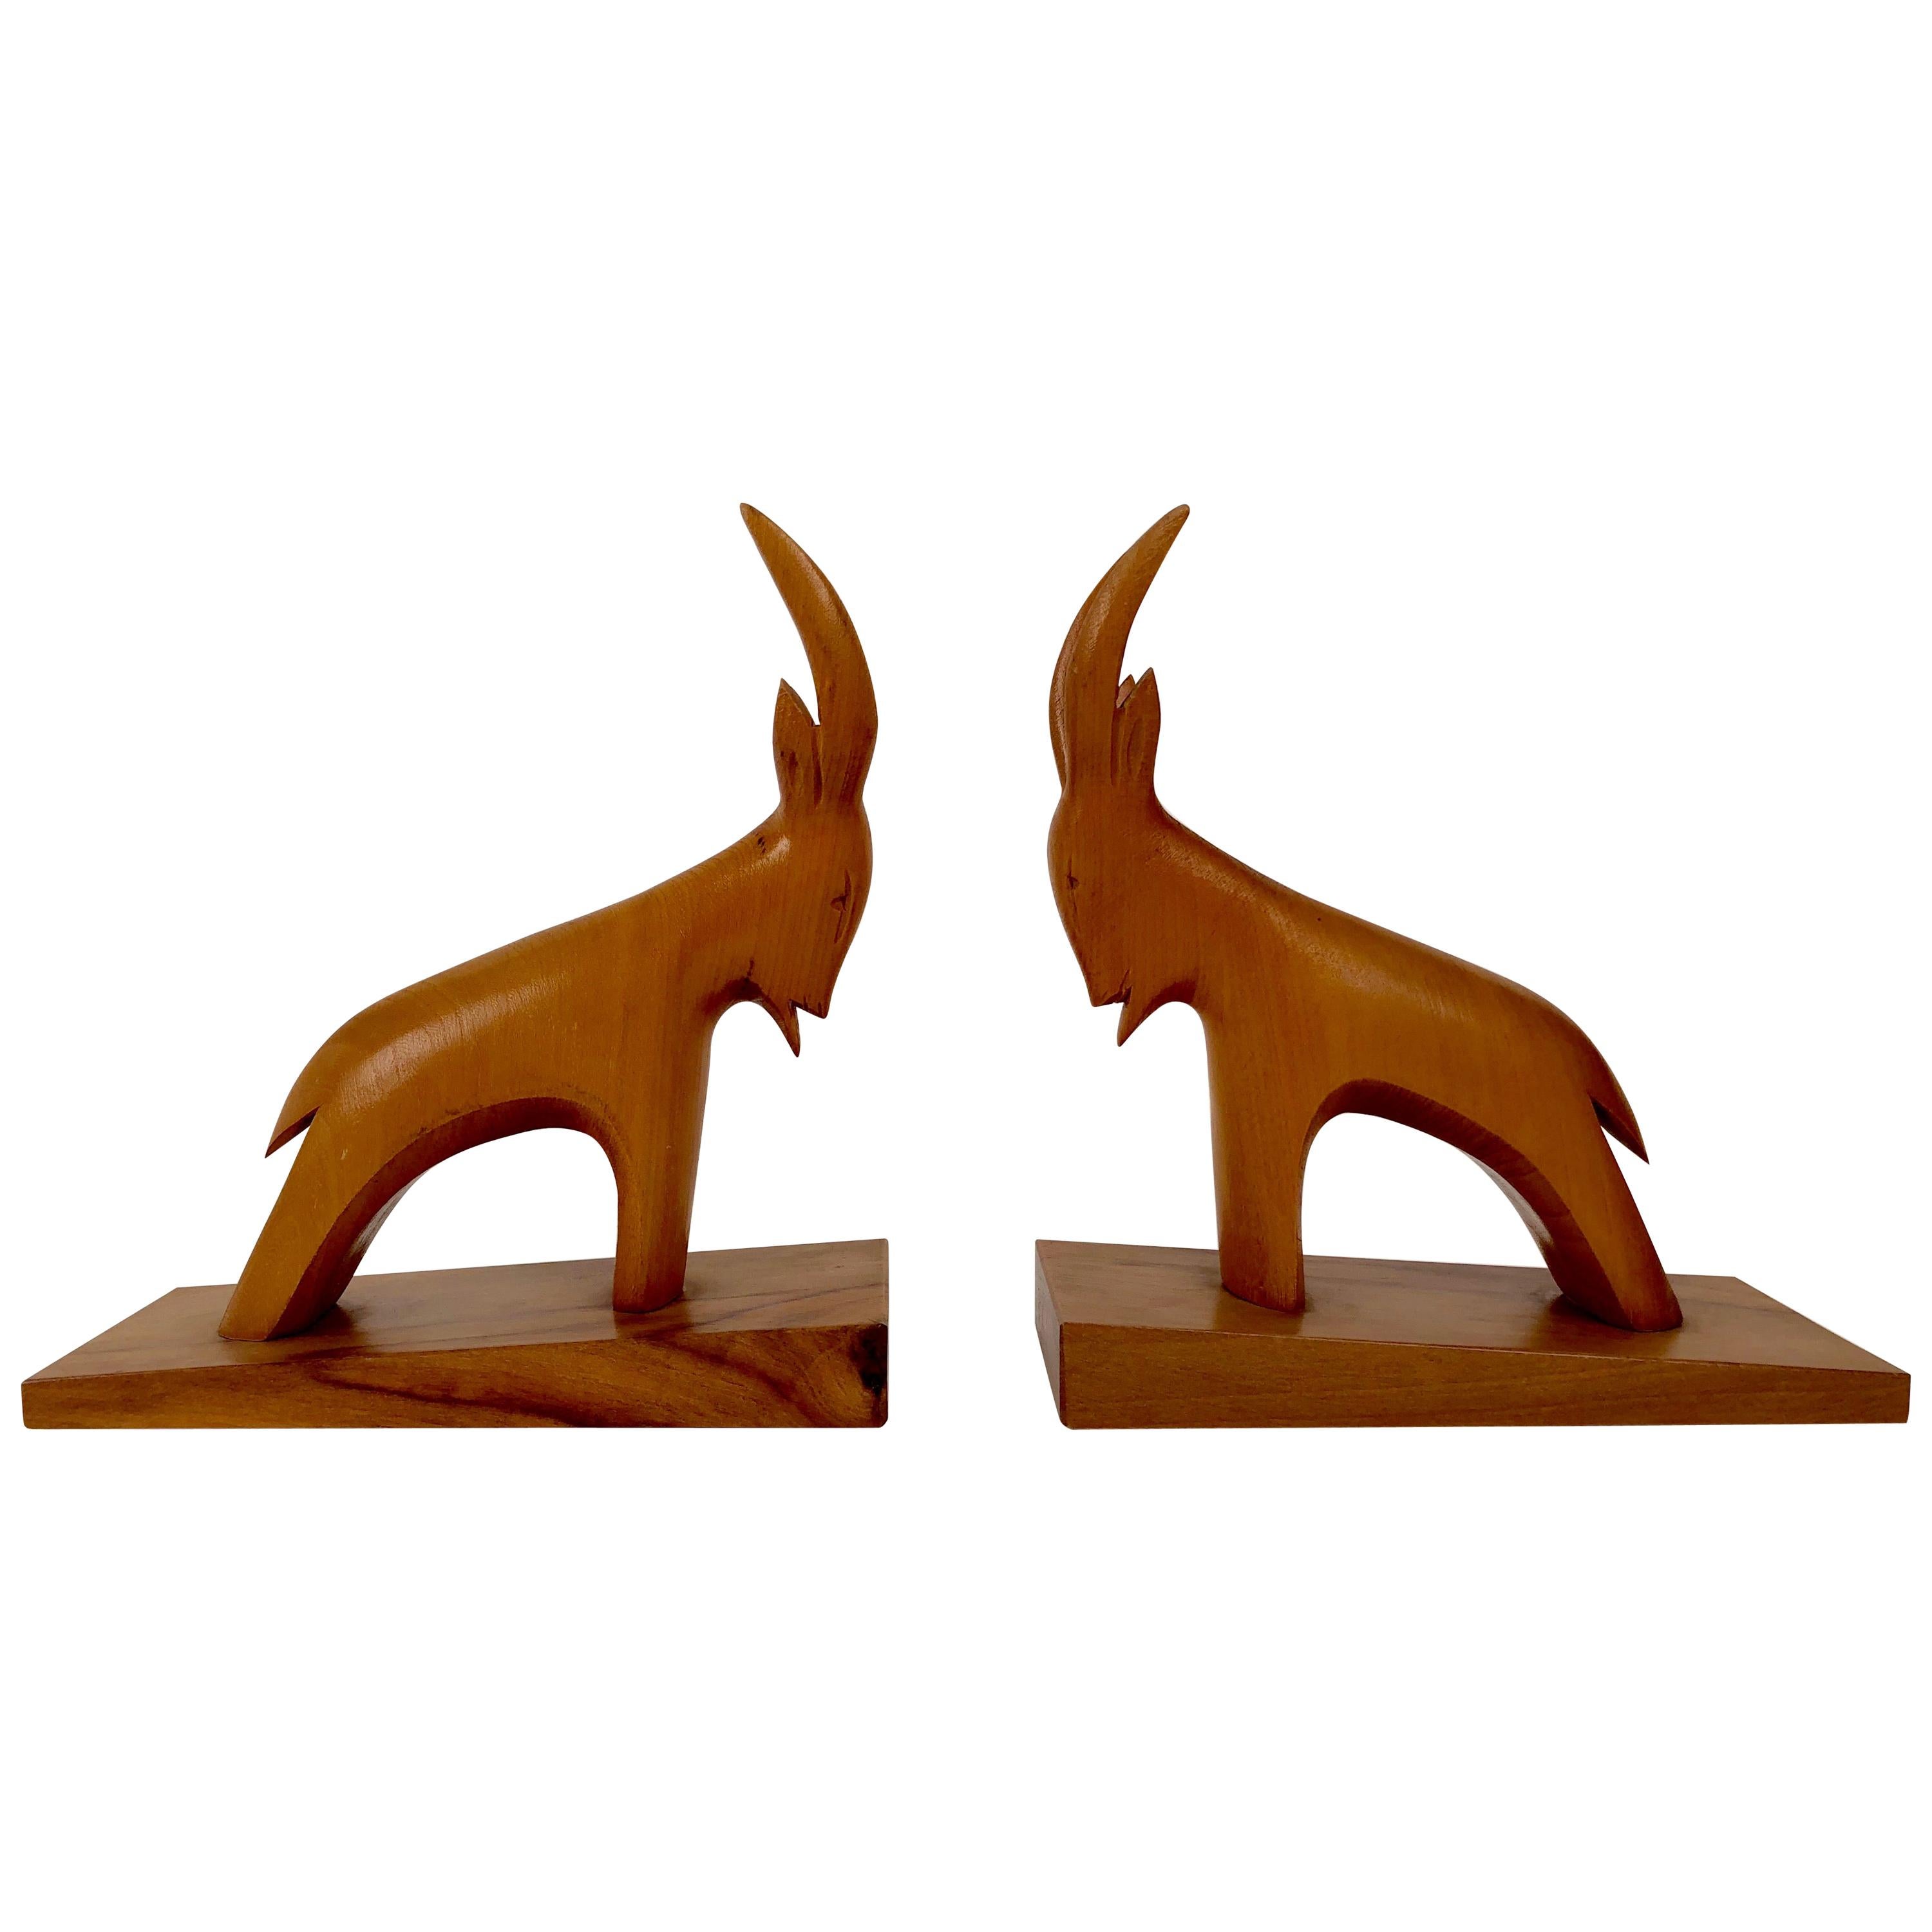 Pair of Midcentury, Abstract, Stein Böcks, in Cherry Wood from Austria For Sale